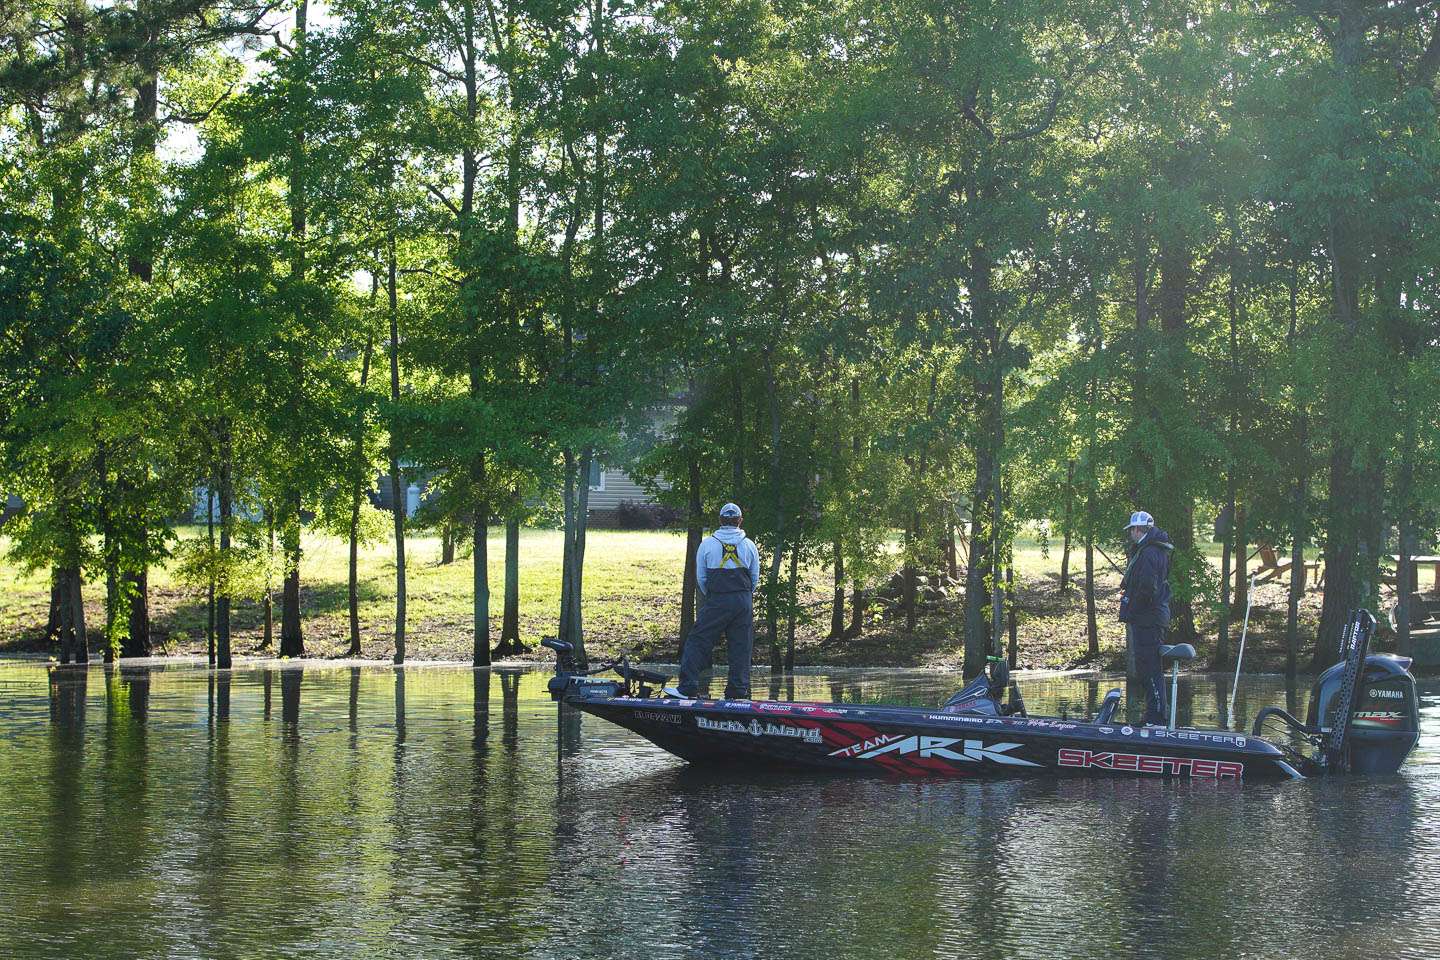 Head up the Coosa River with the Elites early Day 1 of the 2021 Whataburger Bassmaster Elite at Neely Henry Lake!